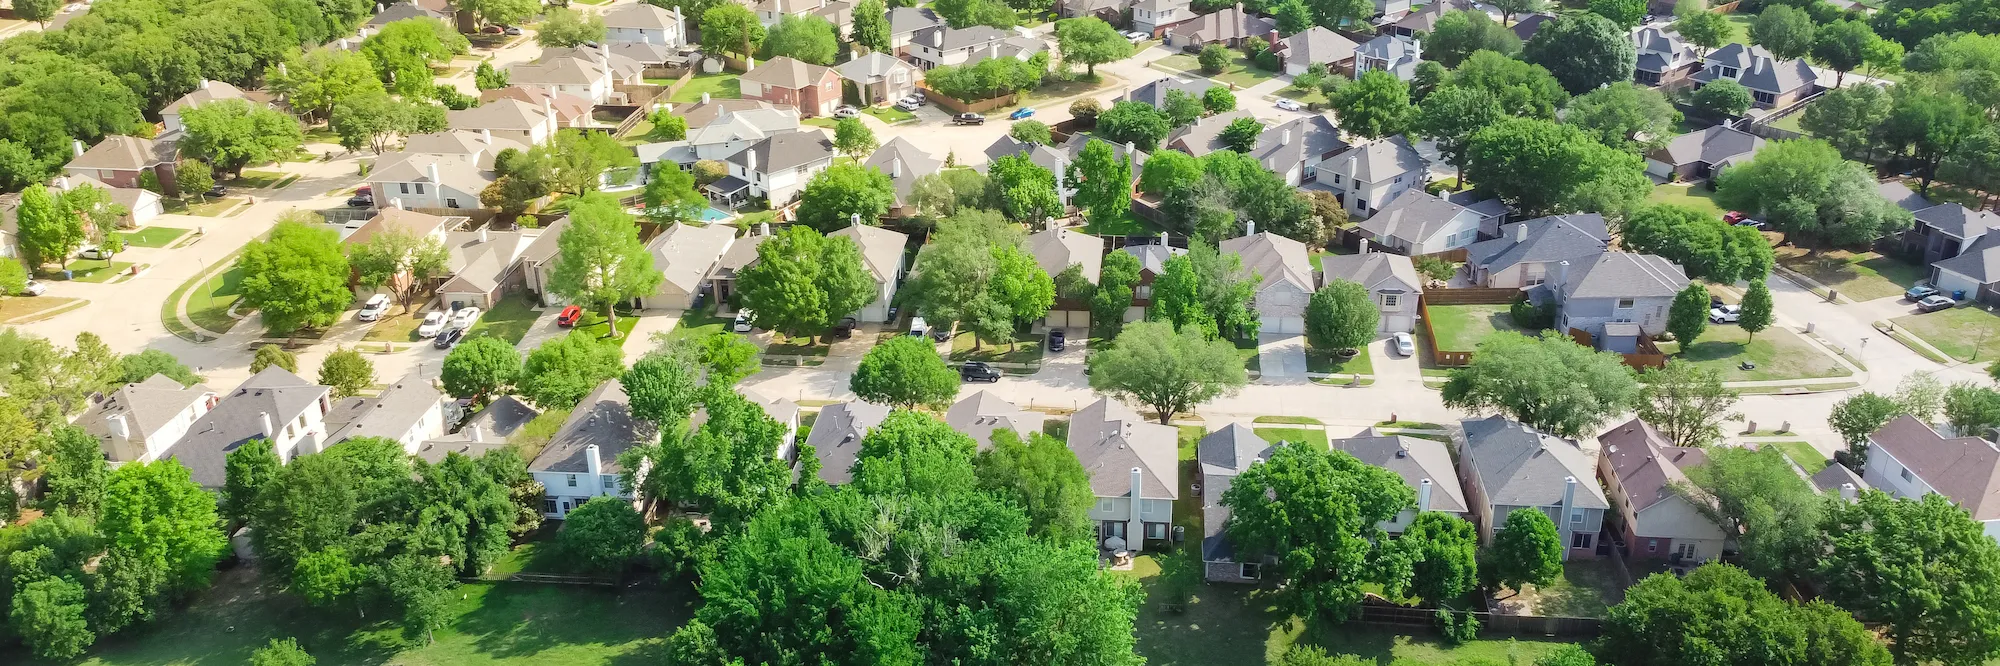 Euless, TX Real Estate, Homes & Condos For Sale